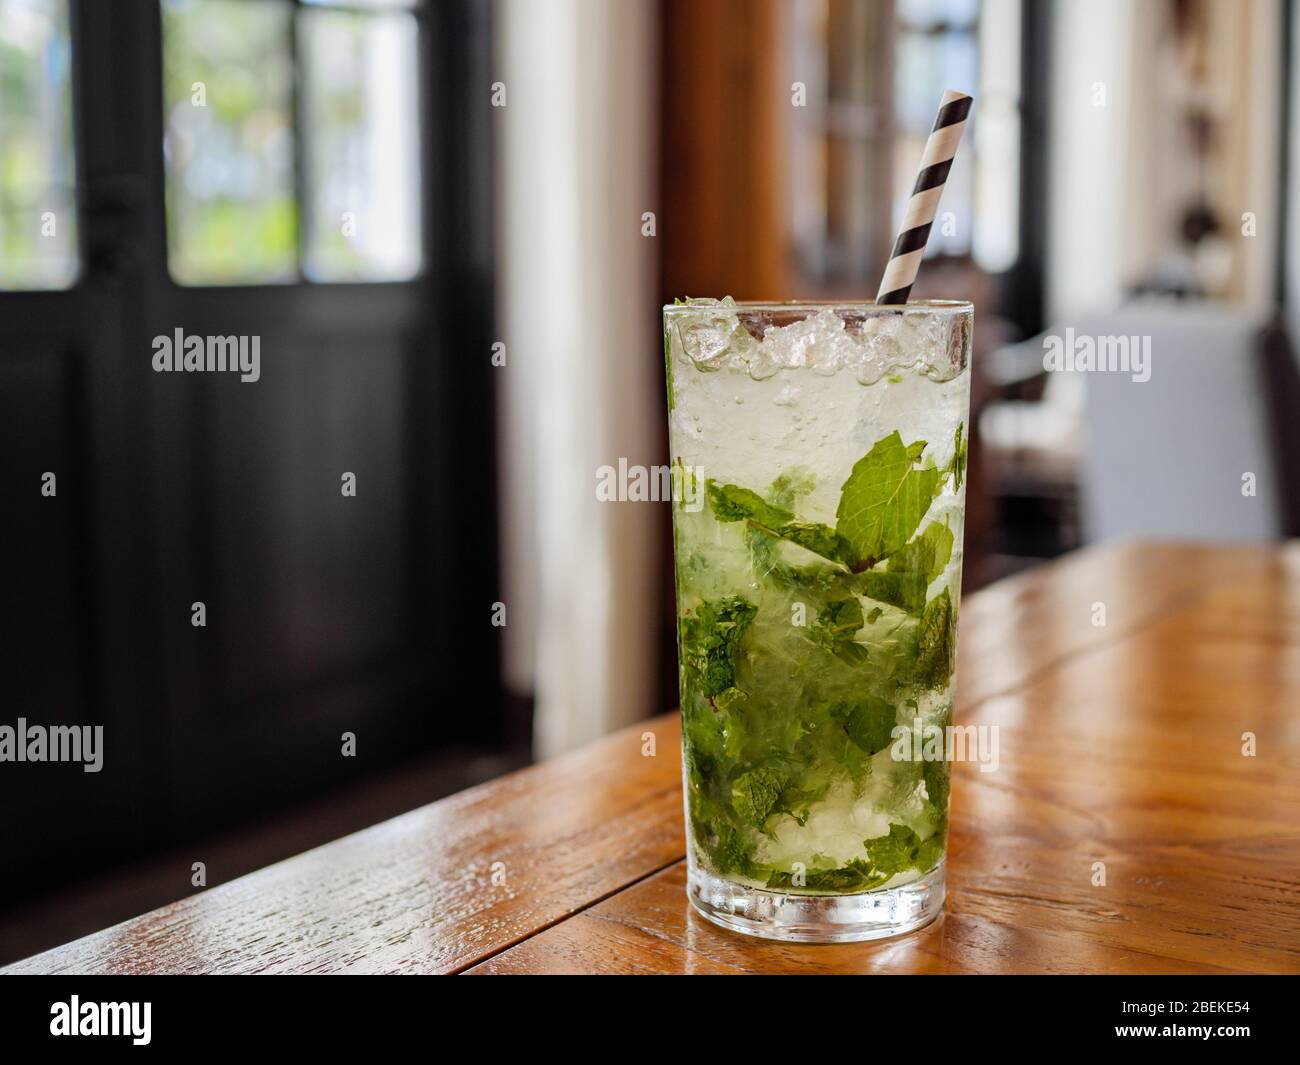 Mojito cocktail with fresh mint leaves and ice cubes in a highball glass during daytime in home / restaurant setting with copy space Stock Photo